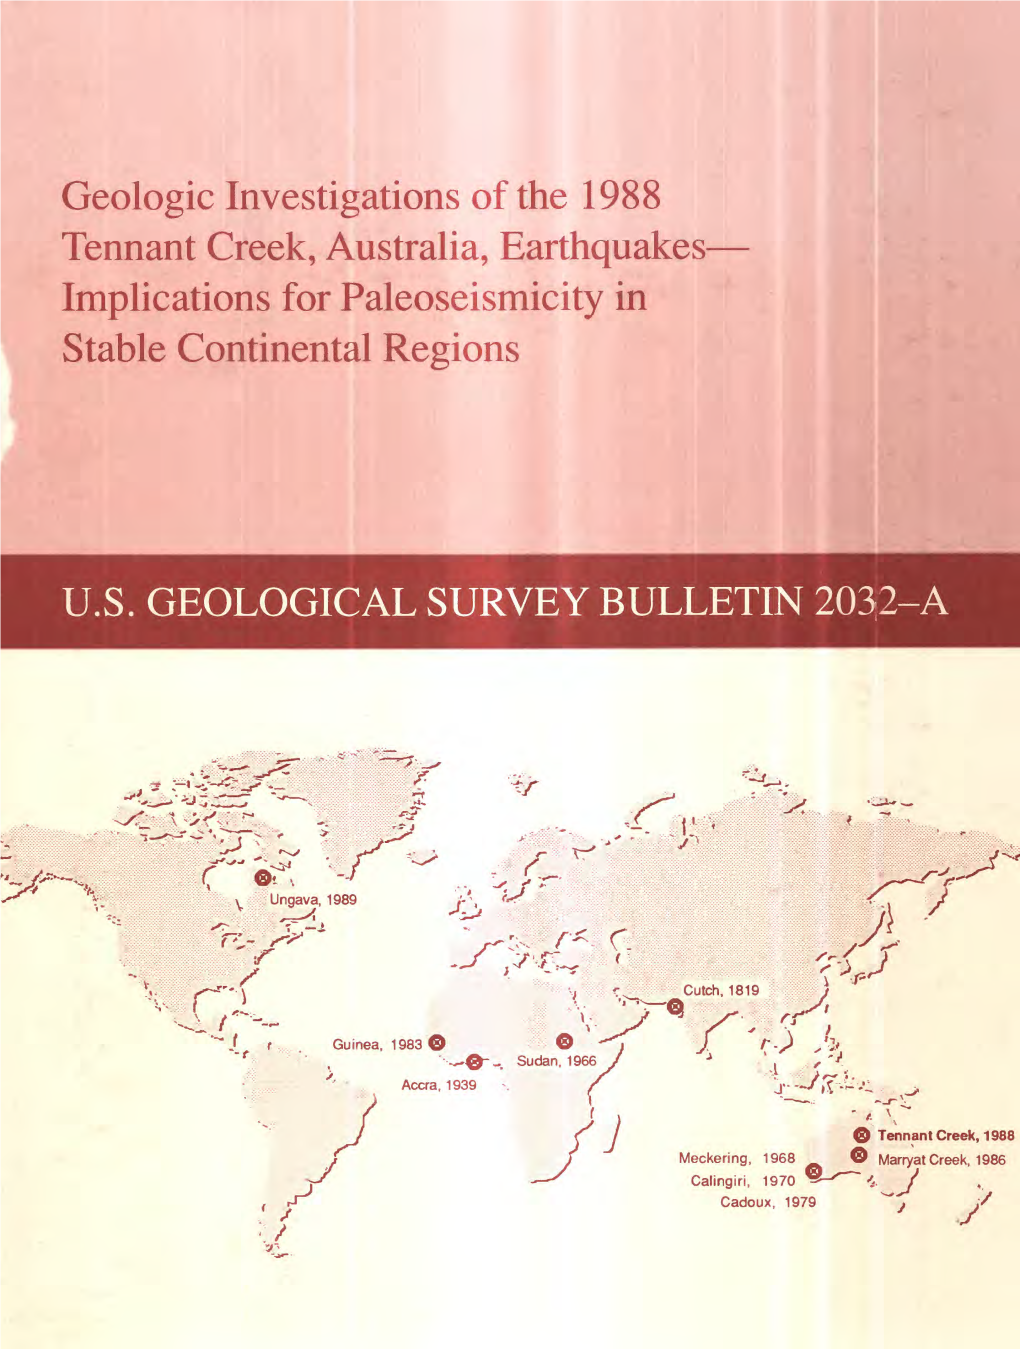 Geologic Investigations of the 1988 Tennant Creek, Australia, Earthquakes Implications for Paleoseismicity in Stable Continental Regions